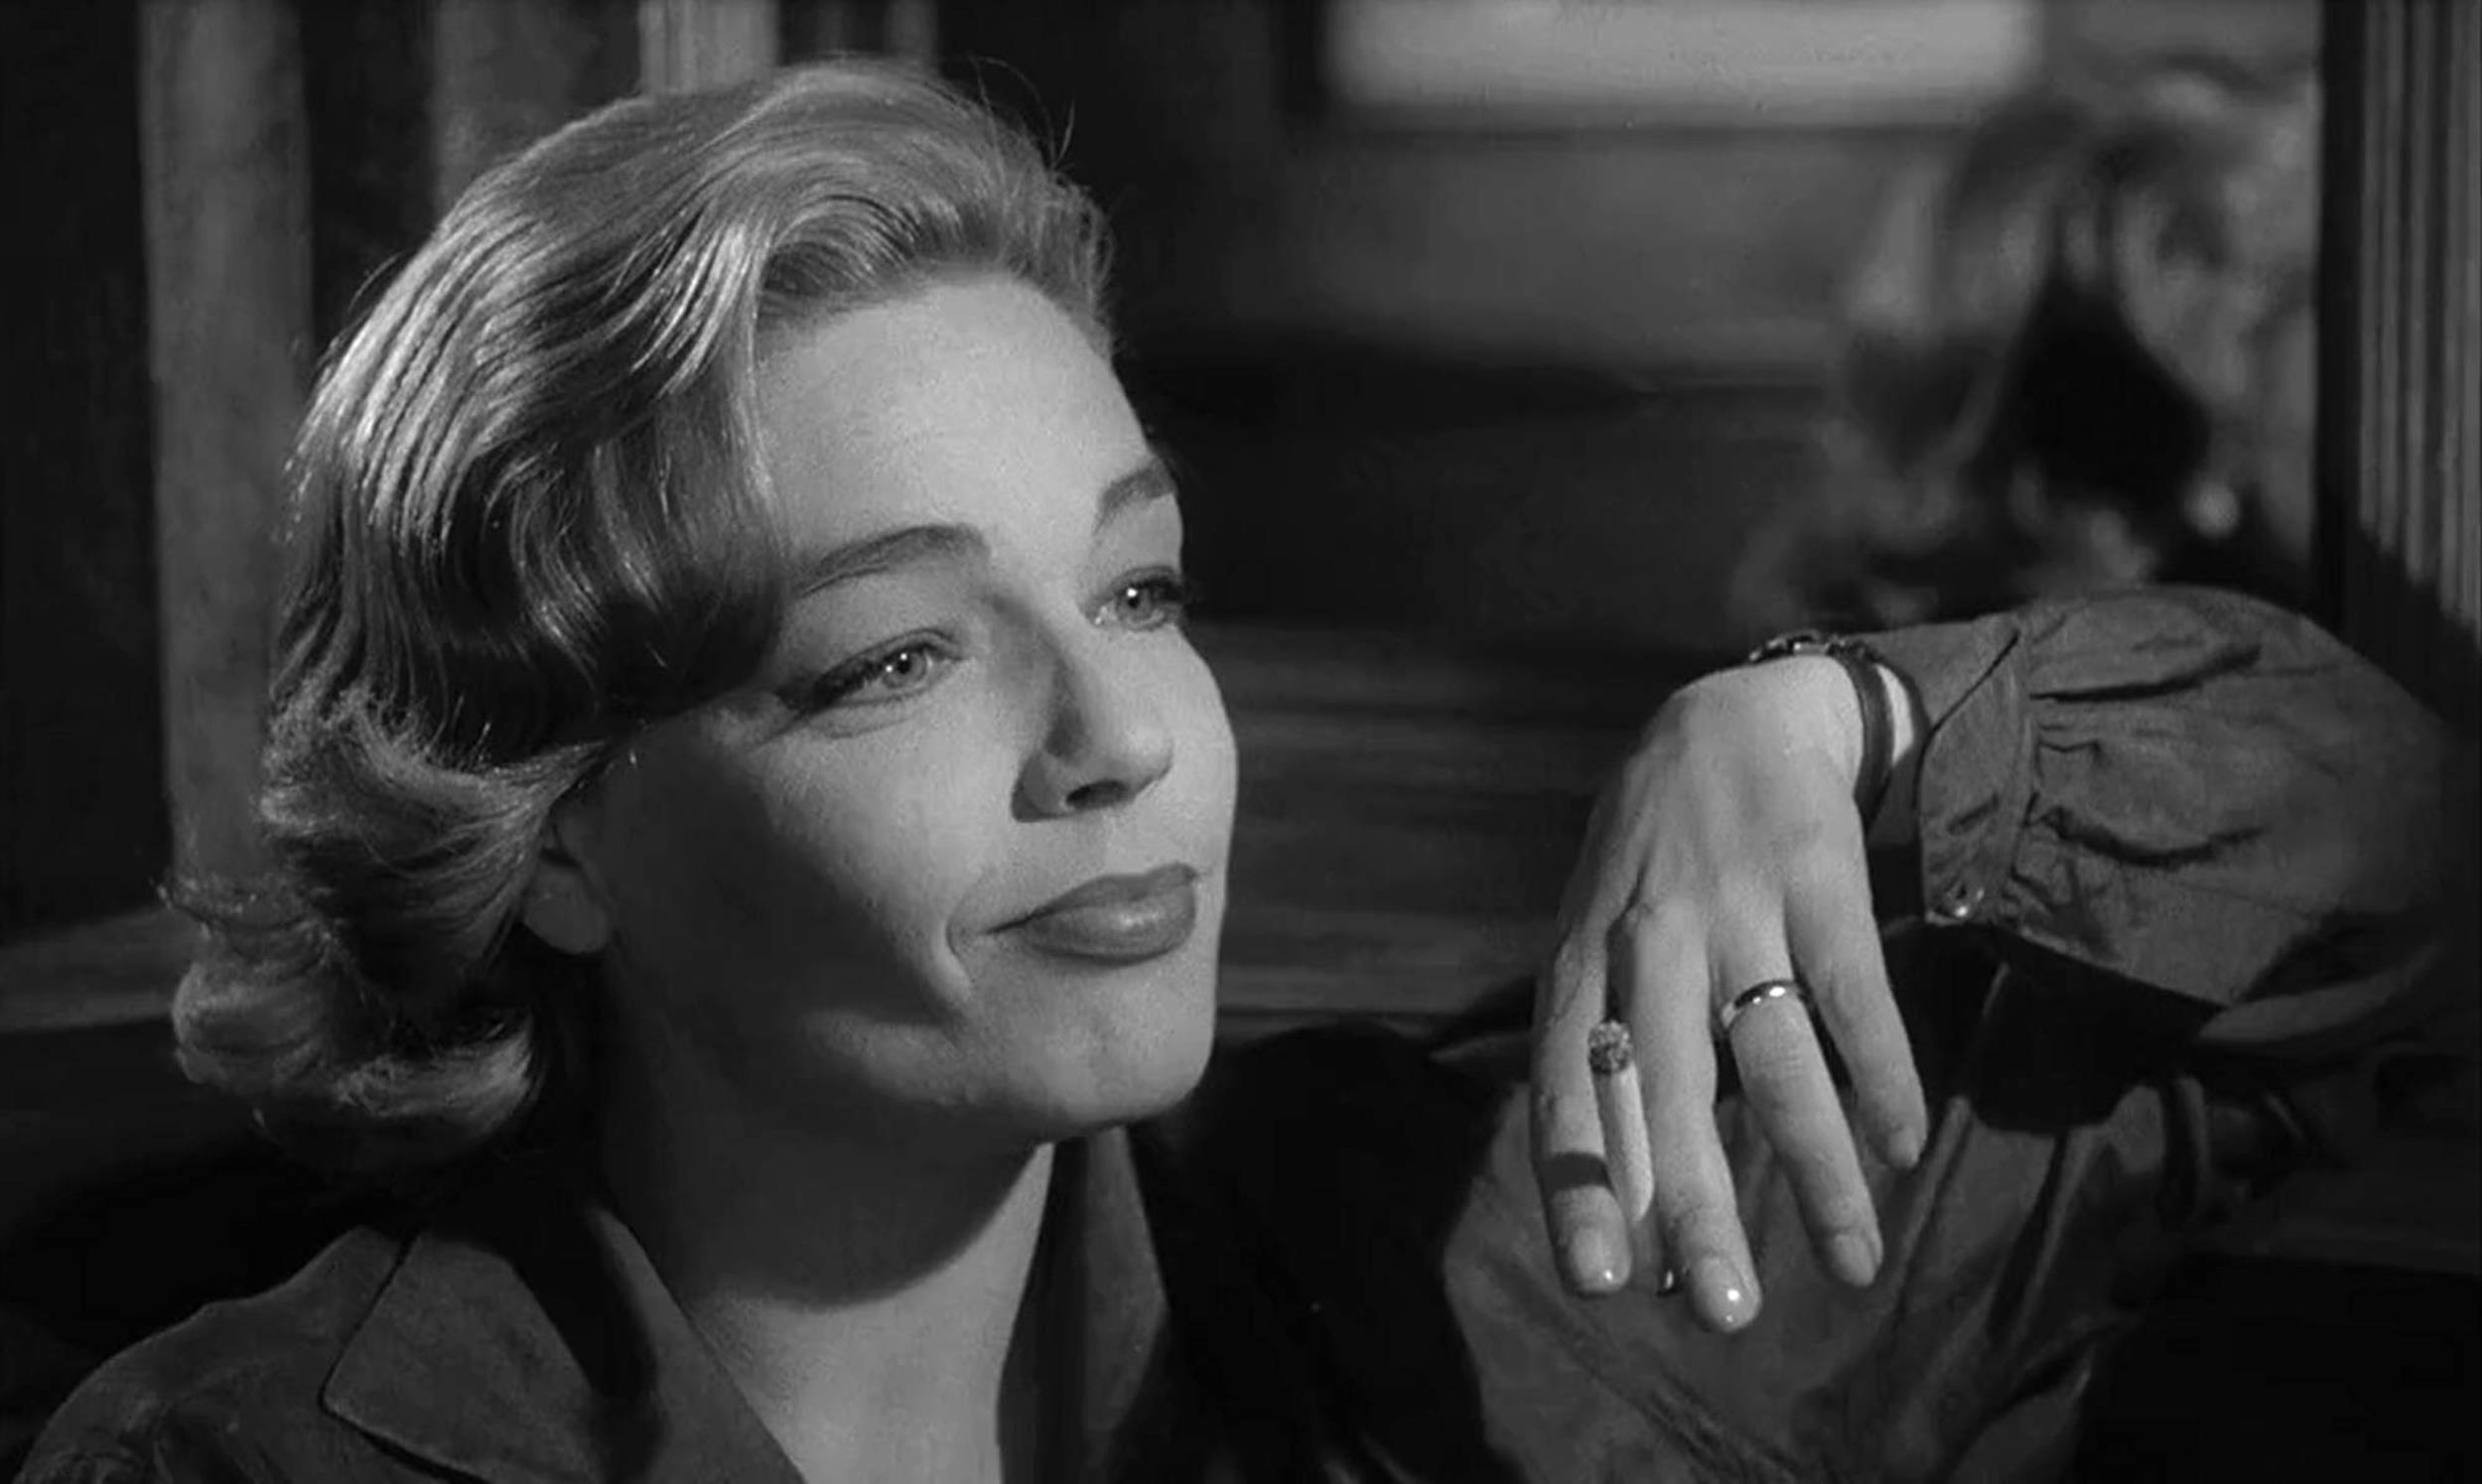 <p>The gorgeous and supremely talented Simone Signoret gave iconic performances in Max Ophüls’s “La Ronde”, Jacques Becker’s “Casque d’or” and Henri-Georges Clouzot’s “Les Diaboliques”, but it took this portrayal of a discarded mistress in Jack Clayton’s adaptation of John Braine’s kitchen-sink drama to earn her the Oscar-winning validation of her peers. Though the film’s gritty location shooting gives the film a rough edge unusual from dramas of this period, it’s still a formulaic melodrama at heart. Even so, Lawrence Harvey and Allan Cuthbertson provide give a never-better Signoret plenty to work with.</p>